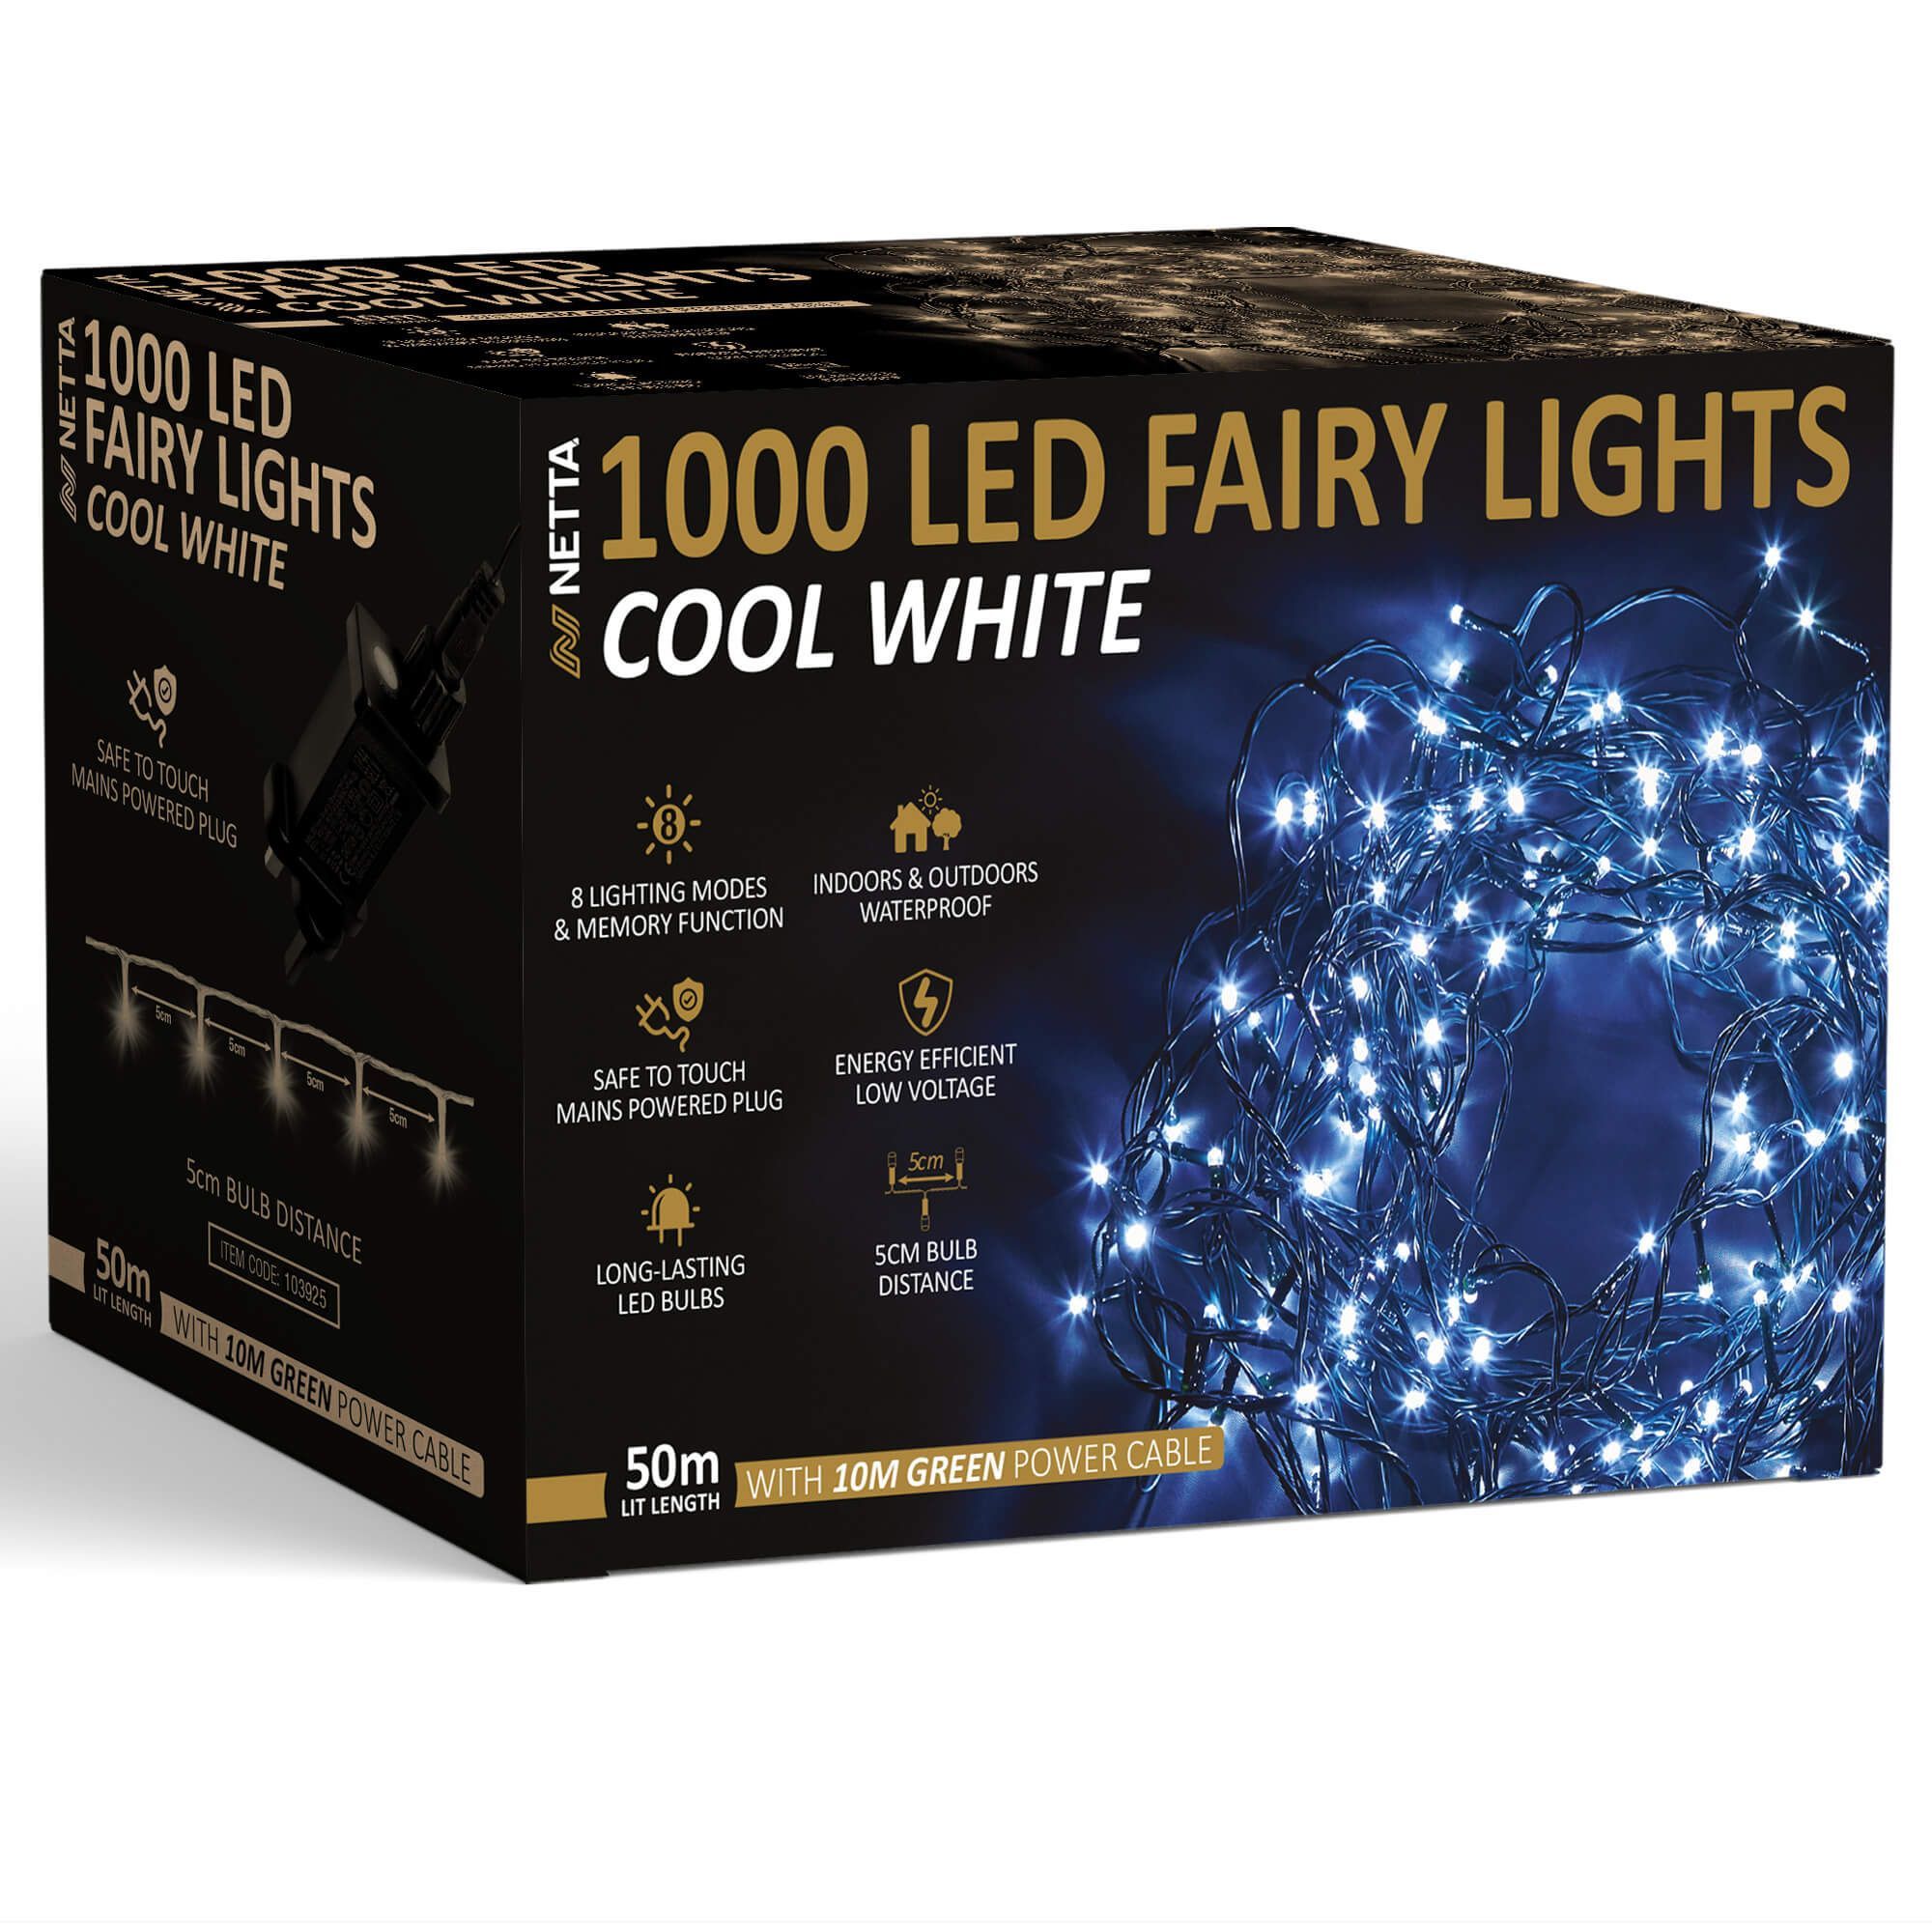 NETTA 1000 LED Fairy Lights 50M Christmas Tree Lights Green Cable - Cool White